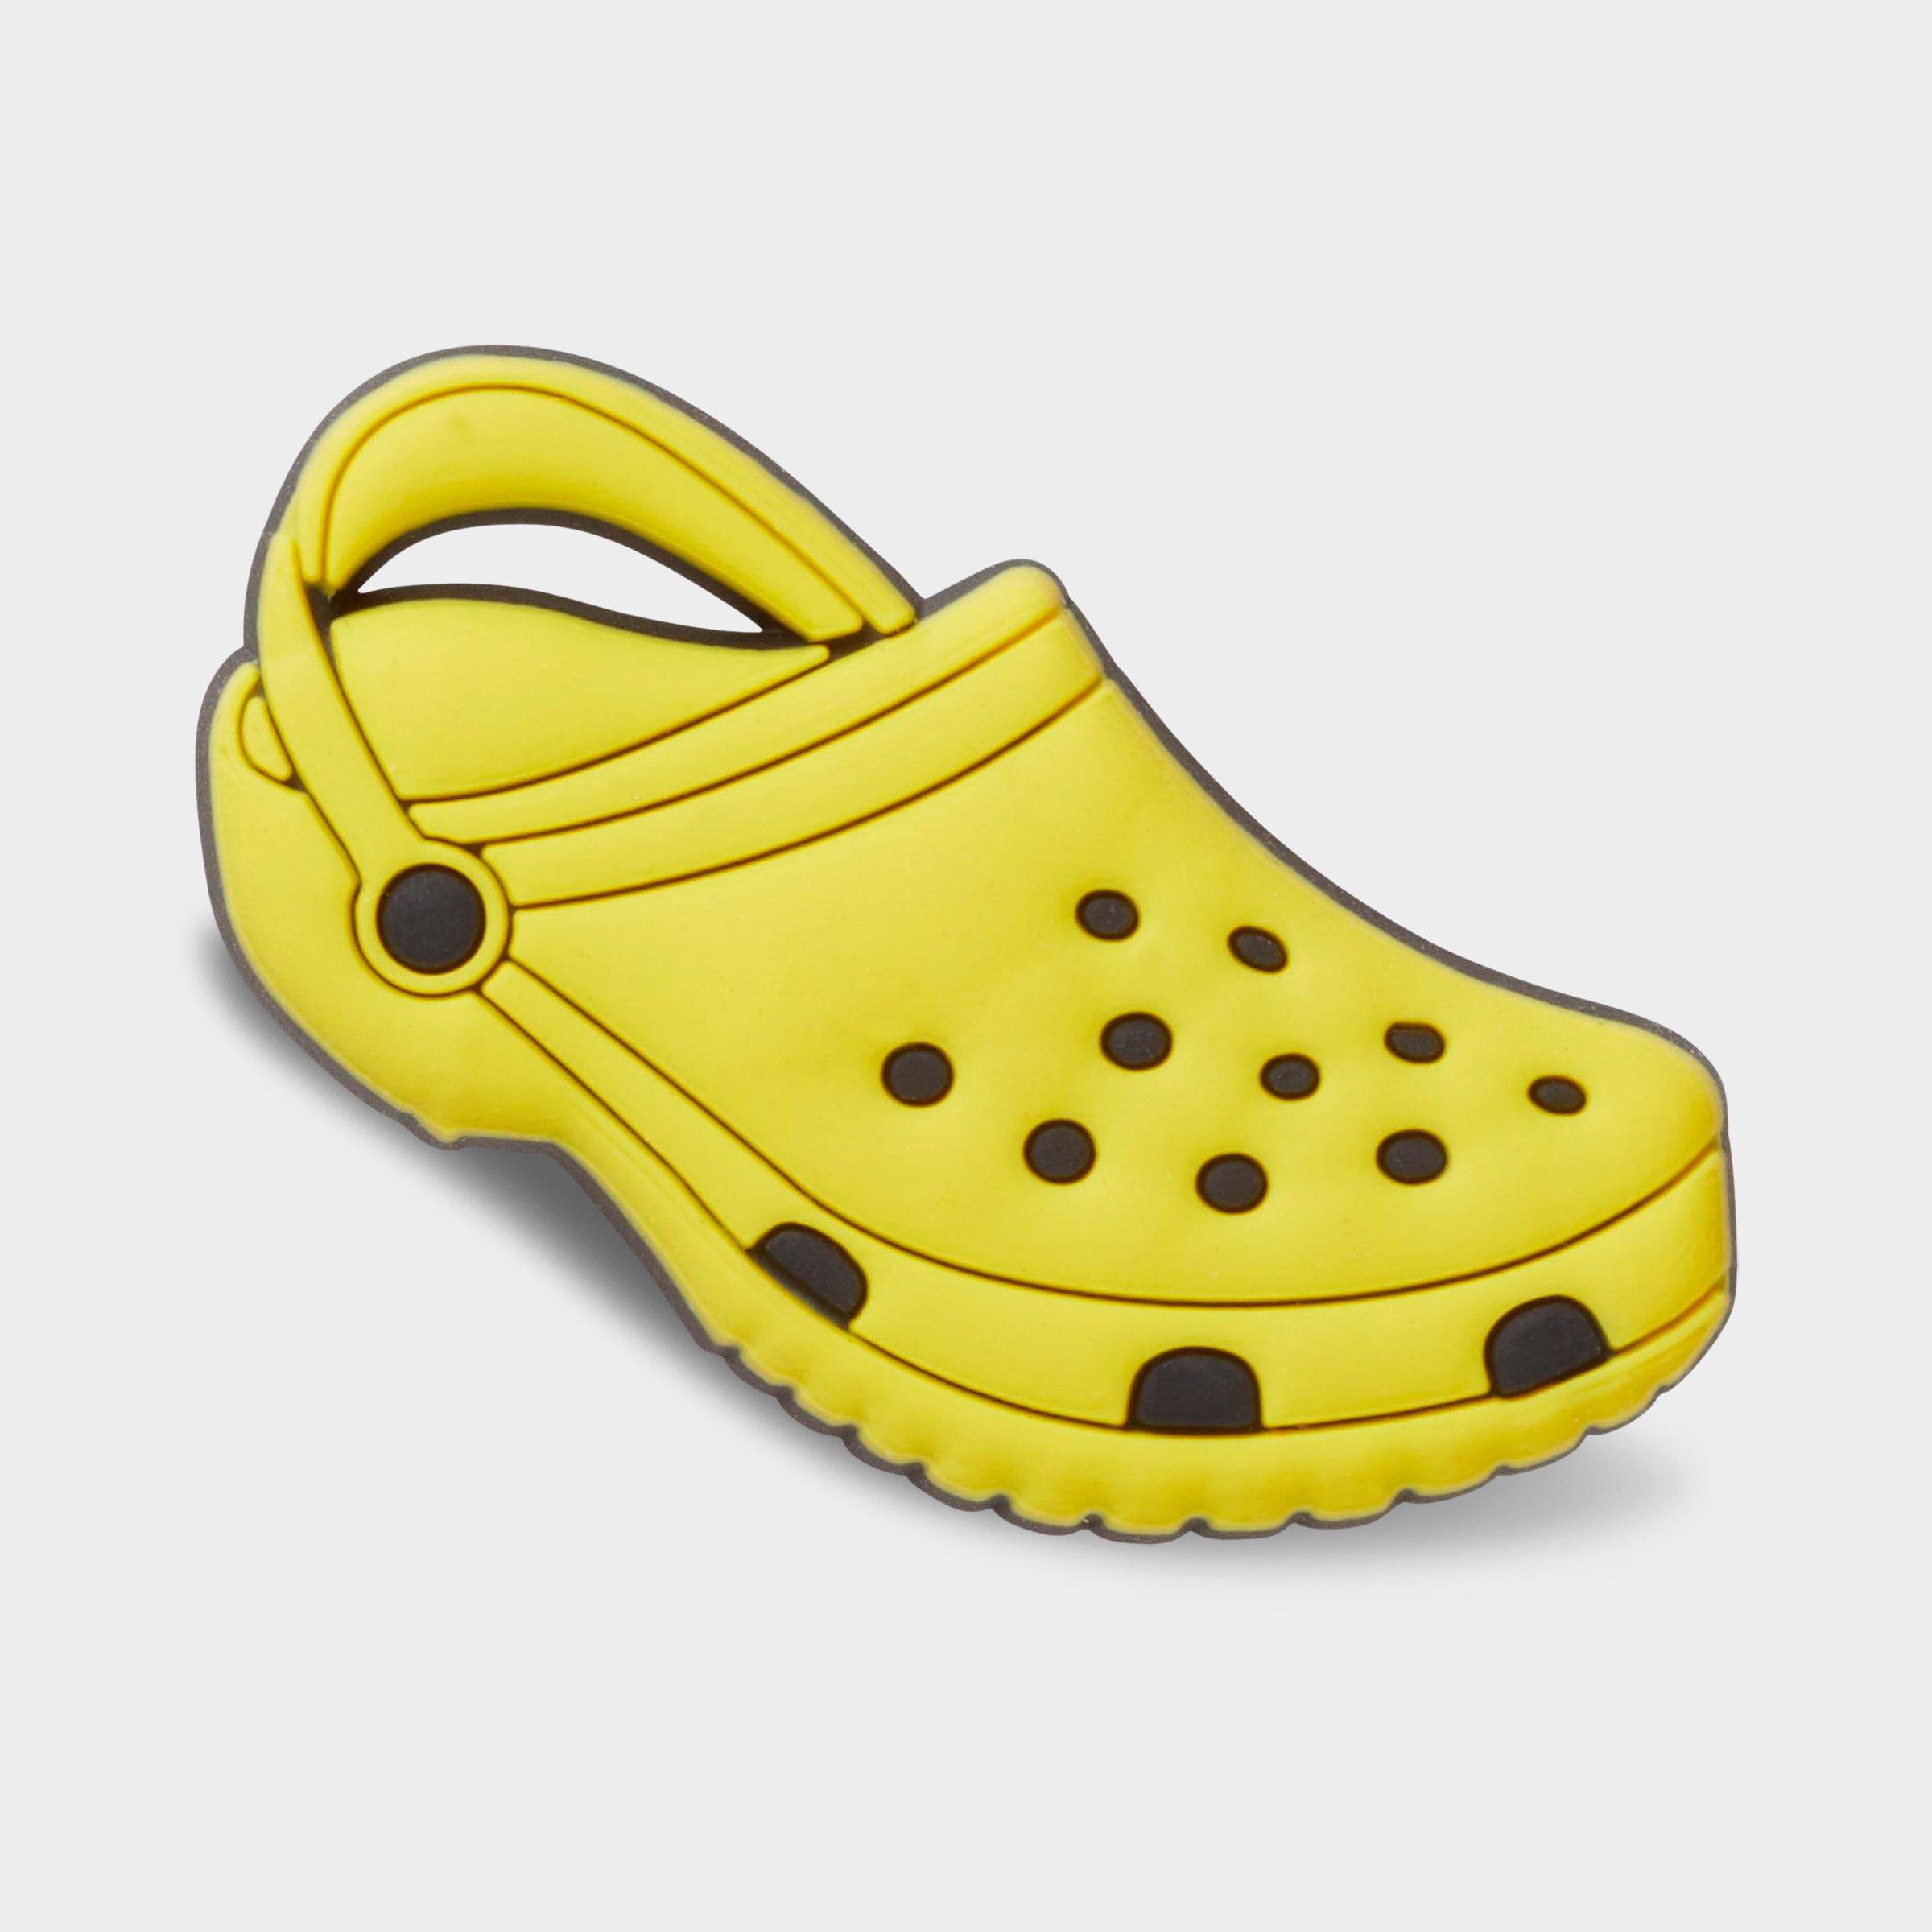 croc charms in store